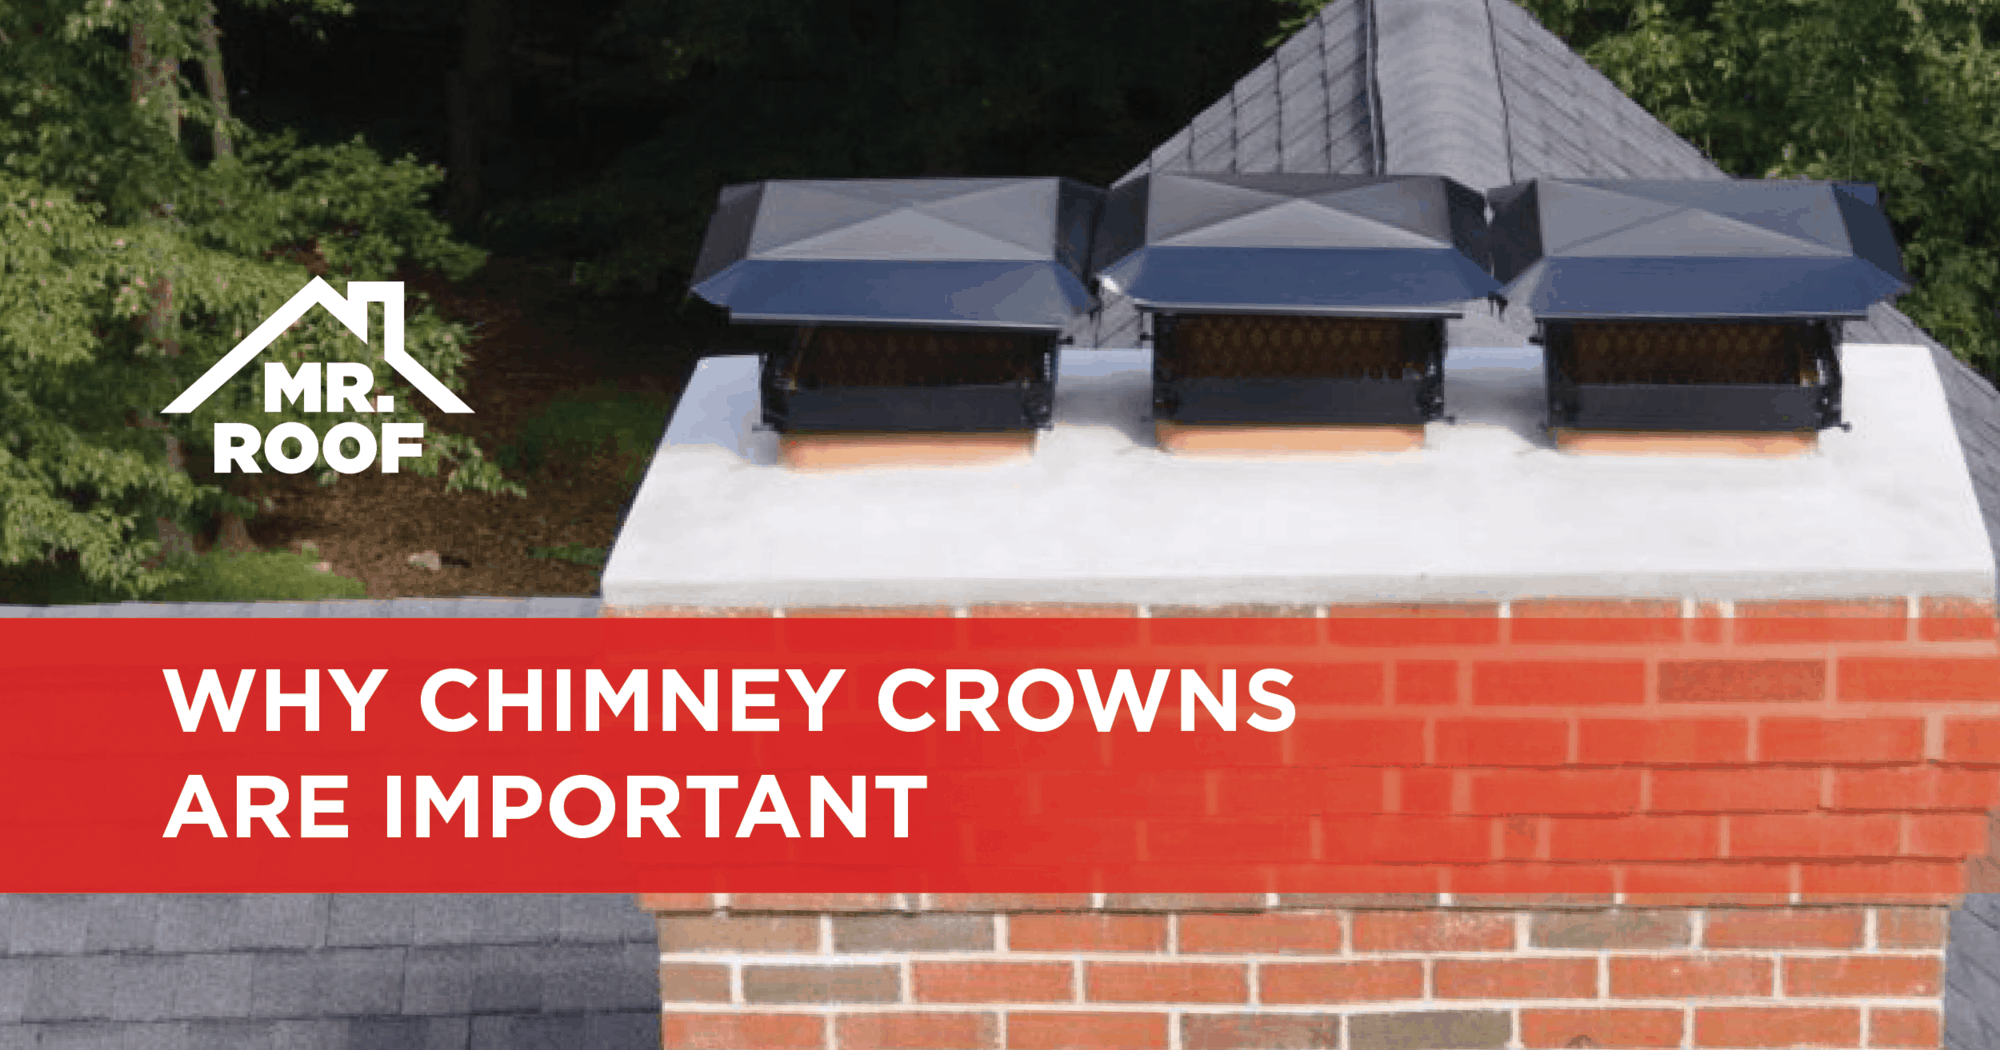 Why Chimney Crowns Are Important